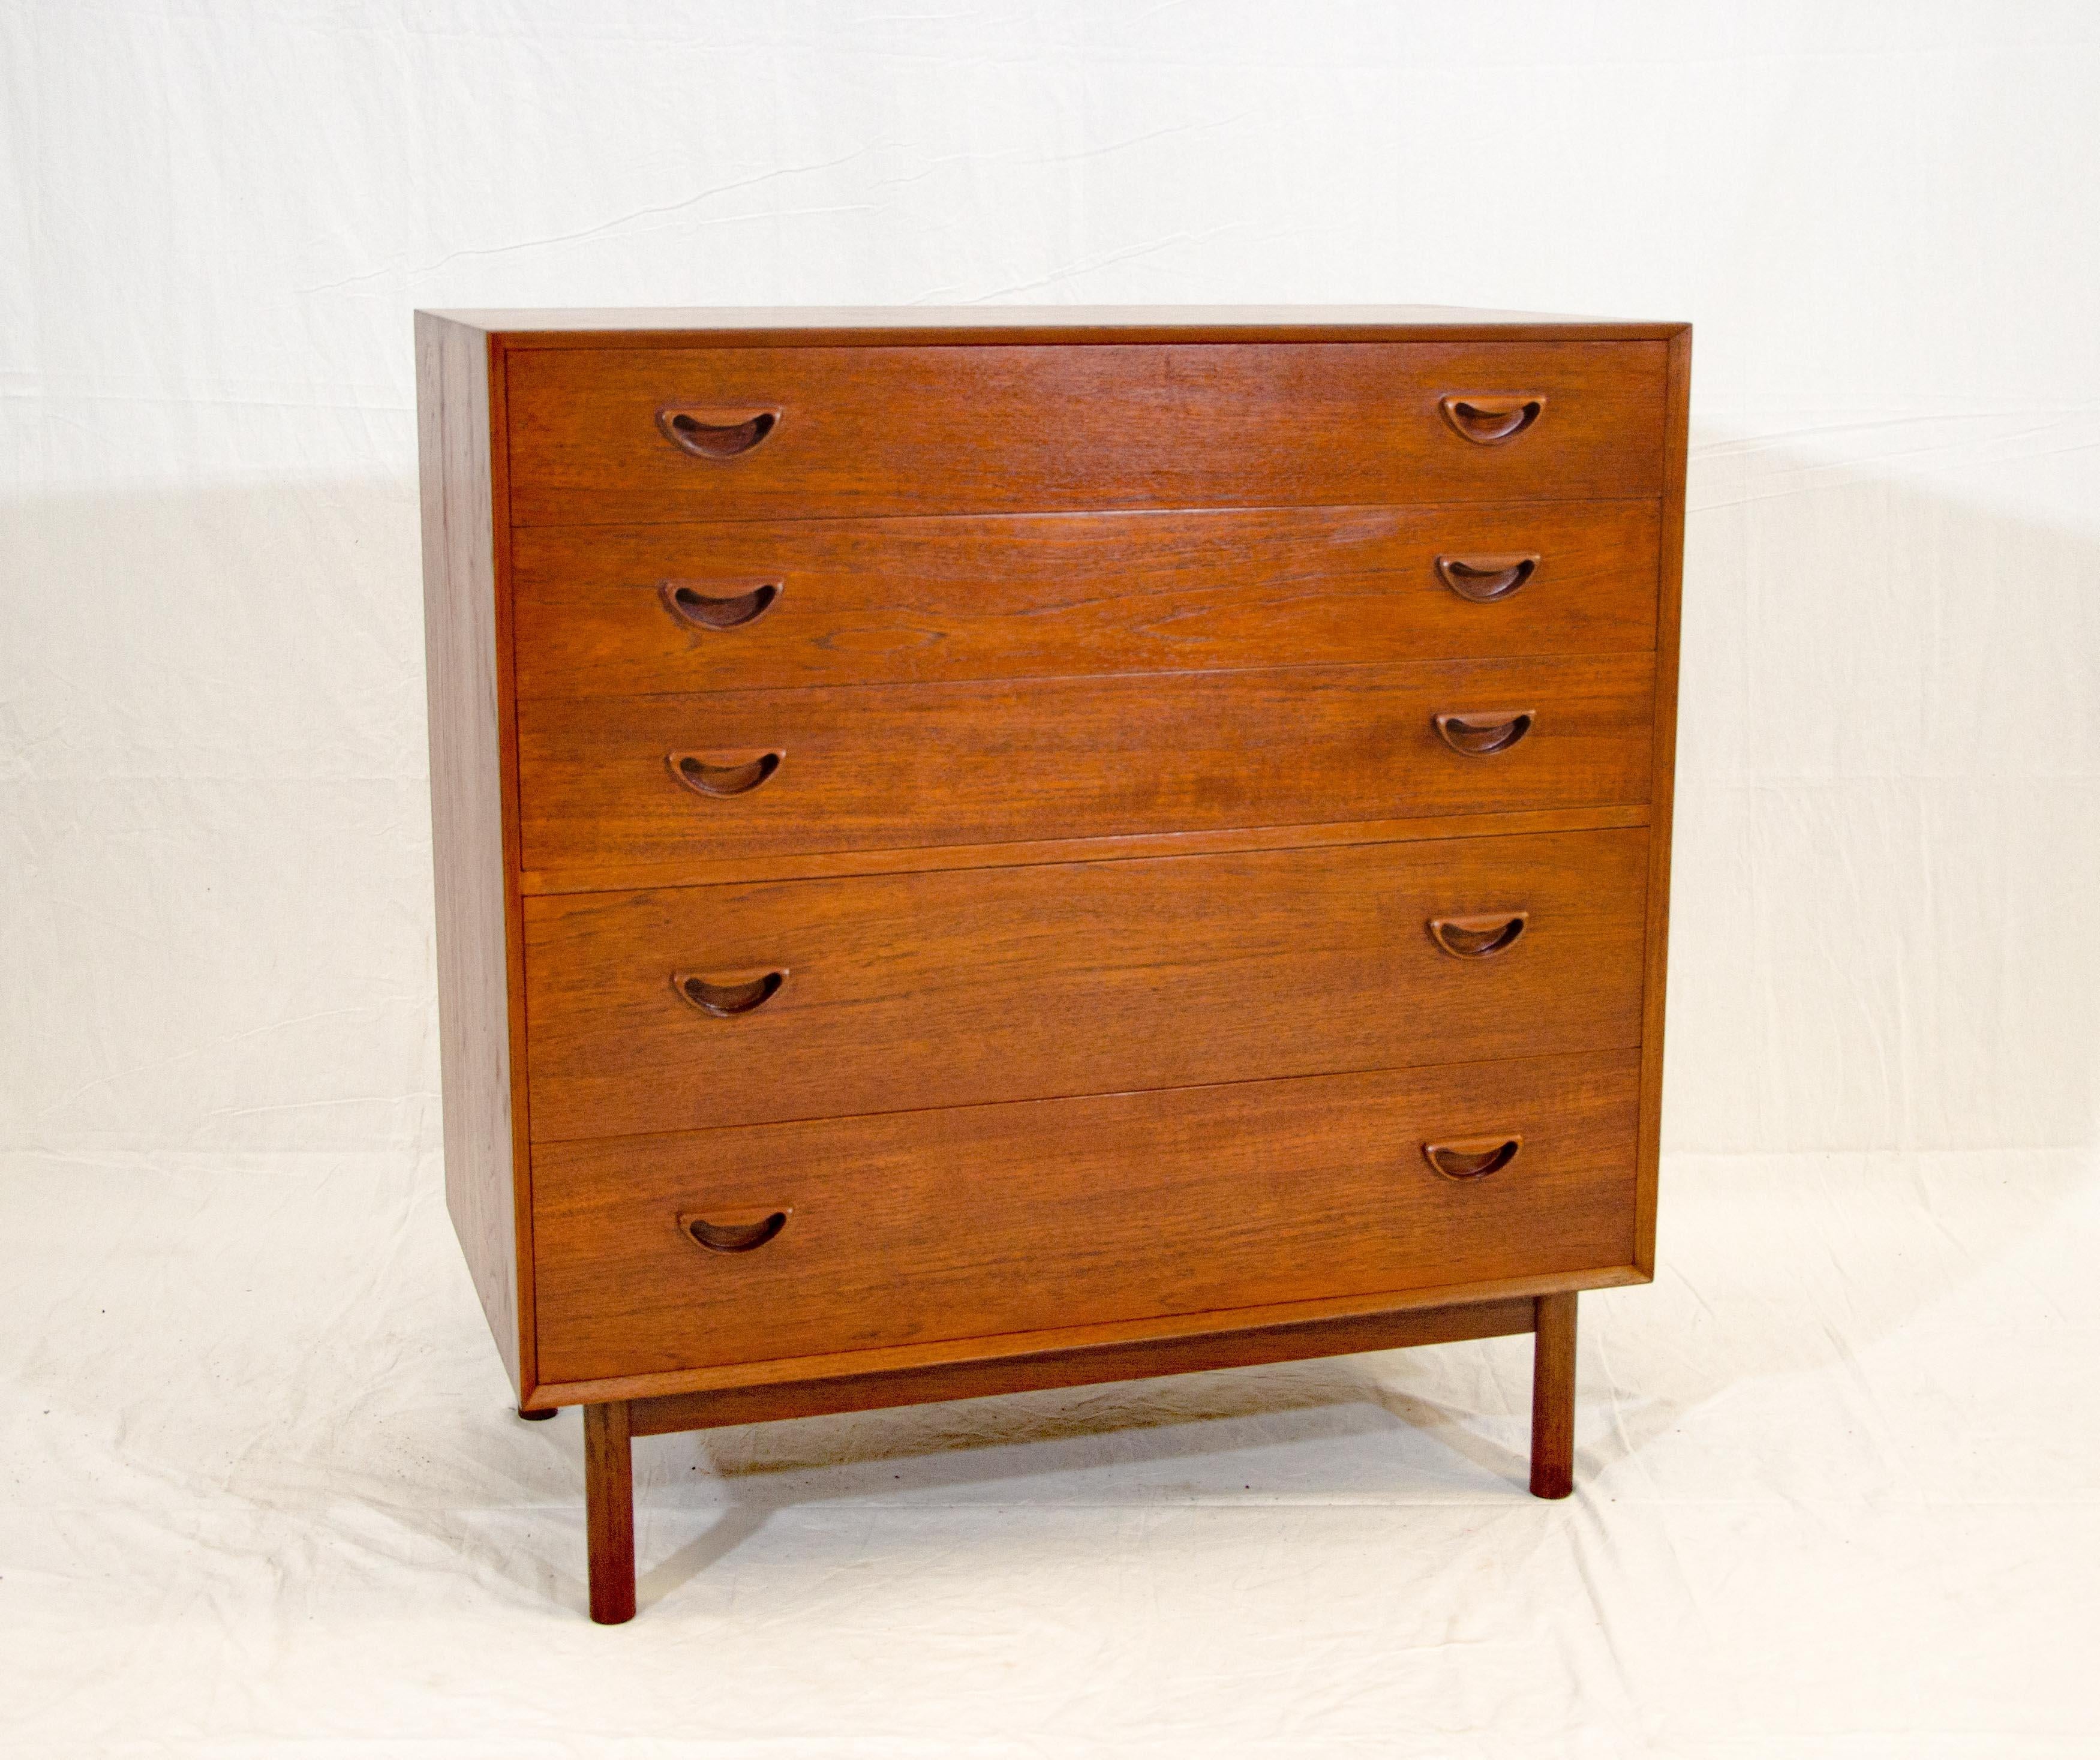 Iconic Danish solid teak chest of drawers with box joinery. Designed by Peter Hvidt & Olga Mølgaard-Nielsen for John Stuart. The top three drawers have an interior depth of 4